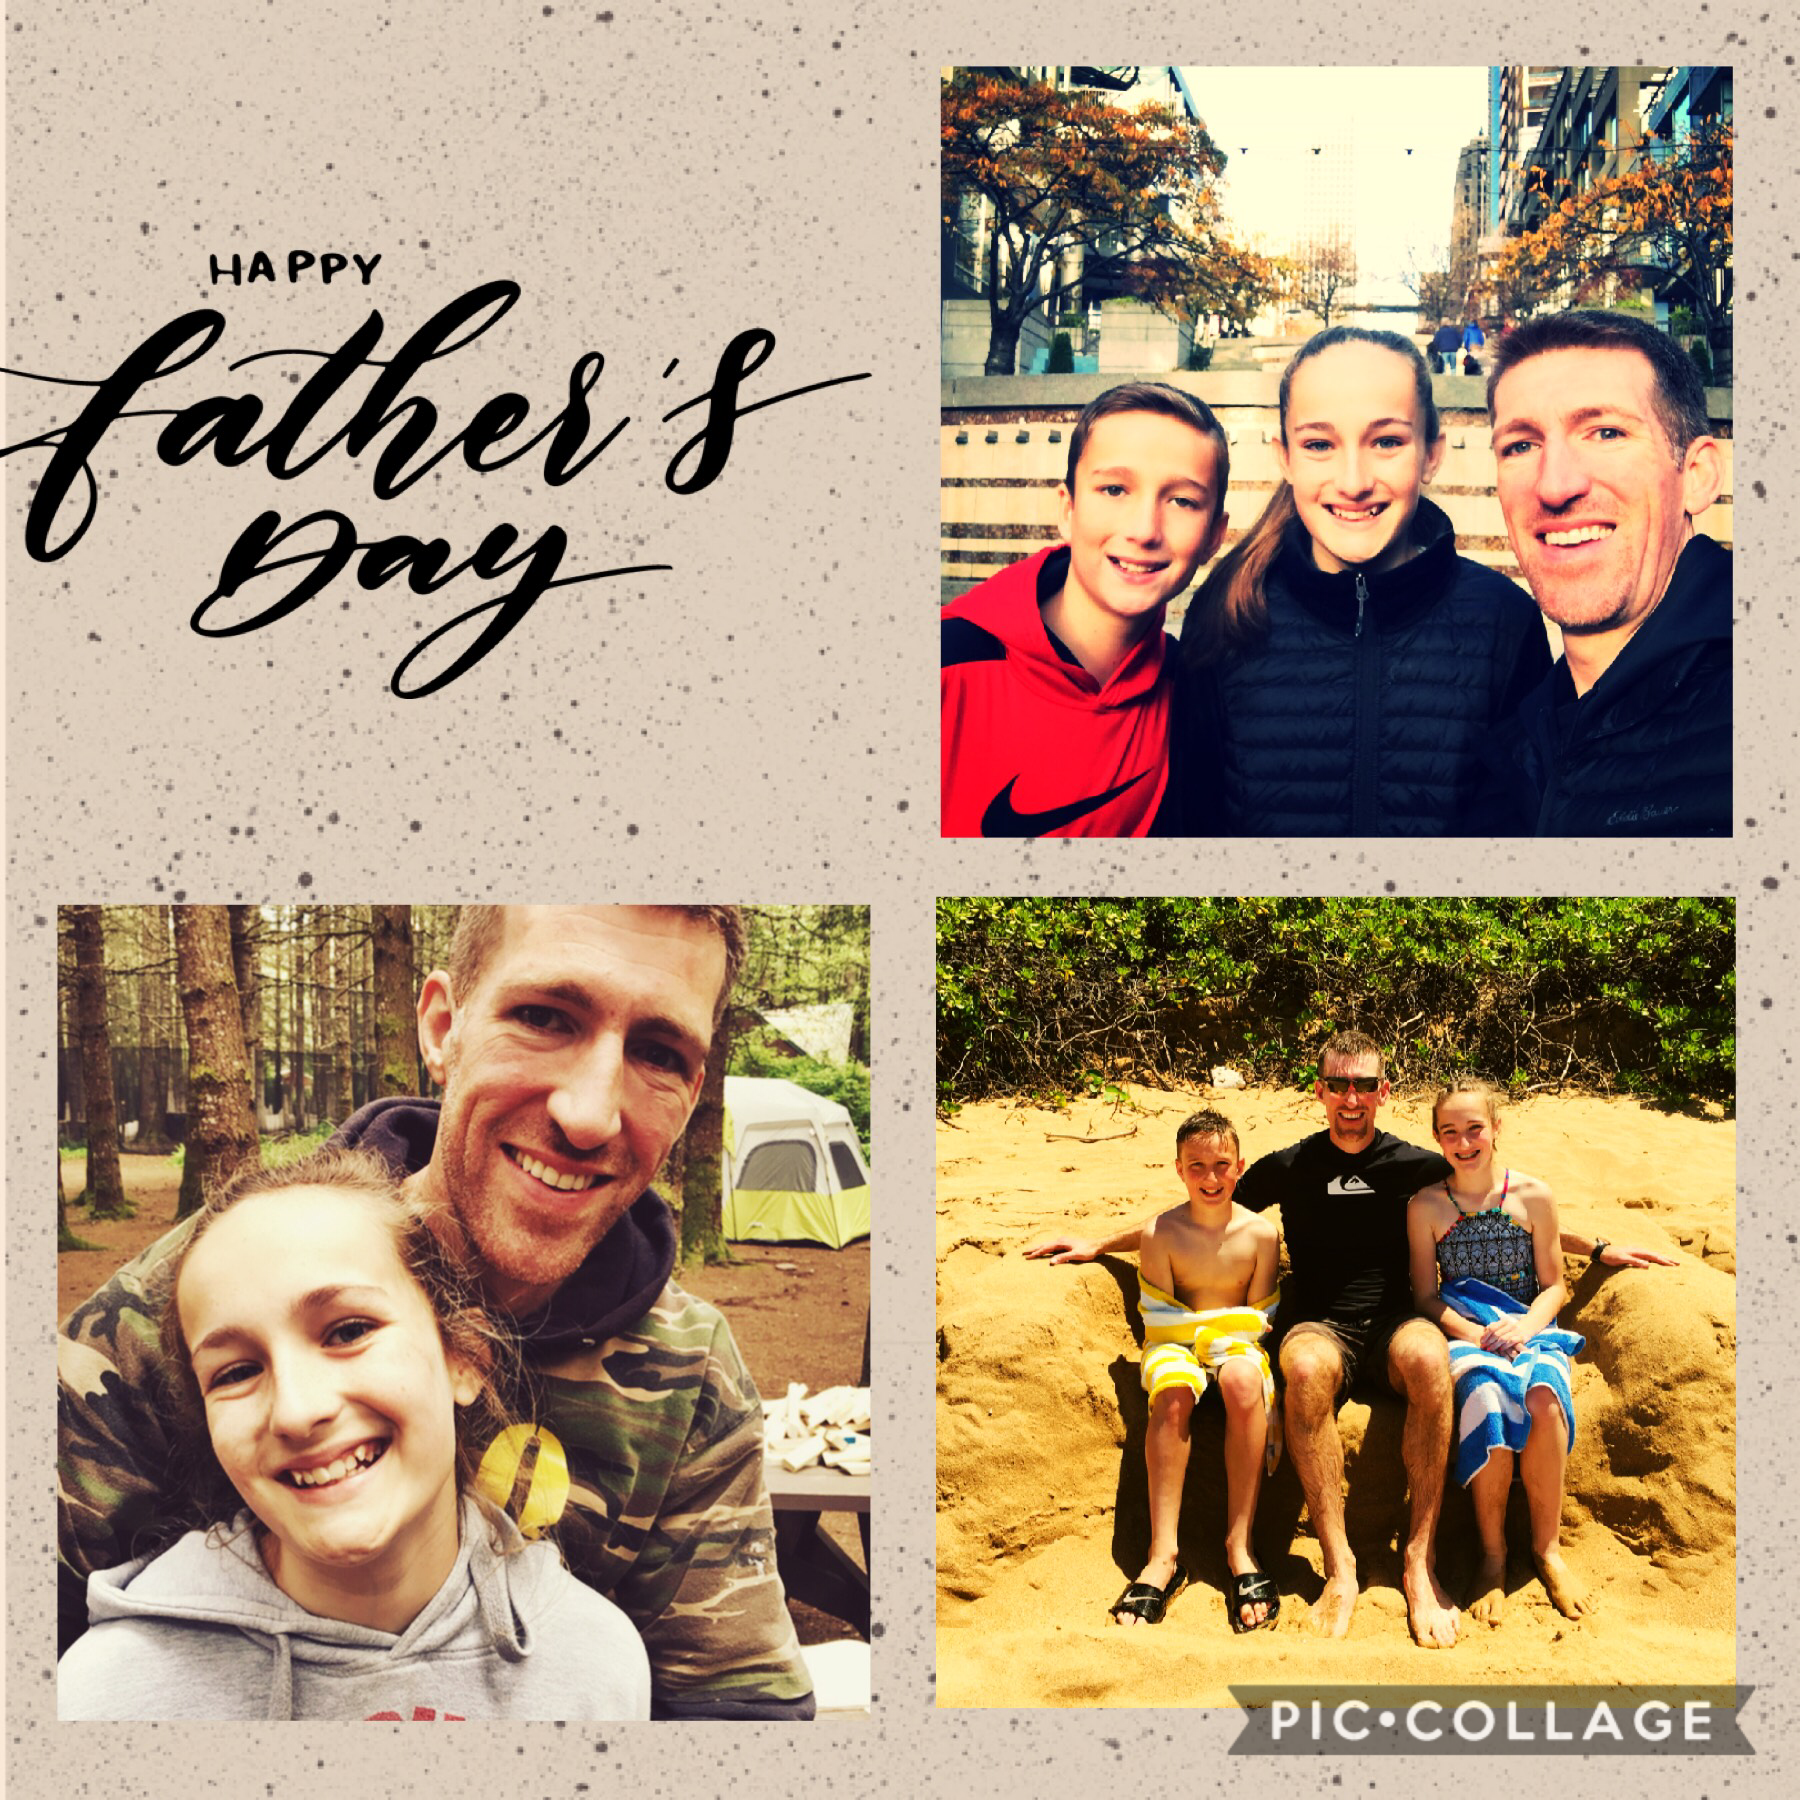 This goes out to my dad; he is the best daddy I could ever ask for and I look up to him so much. Thank you for all that you do for our family!!!! 